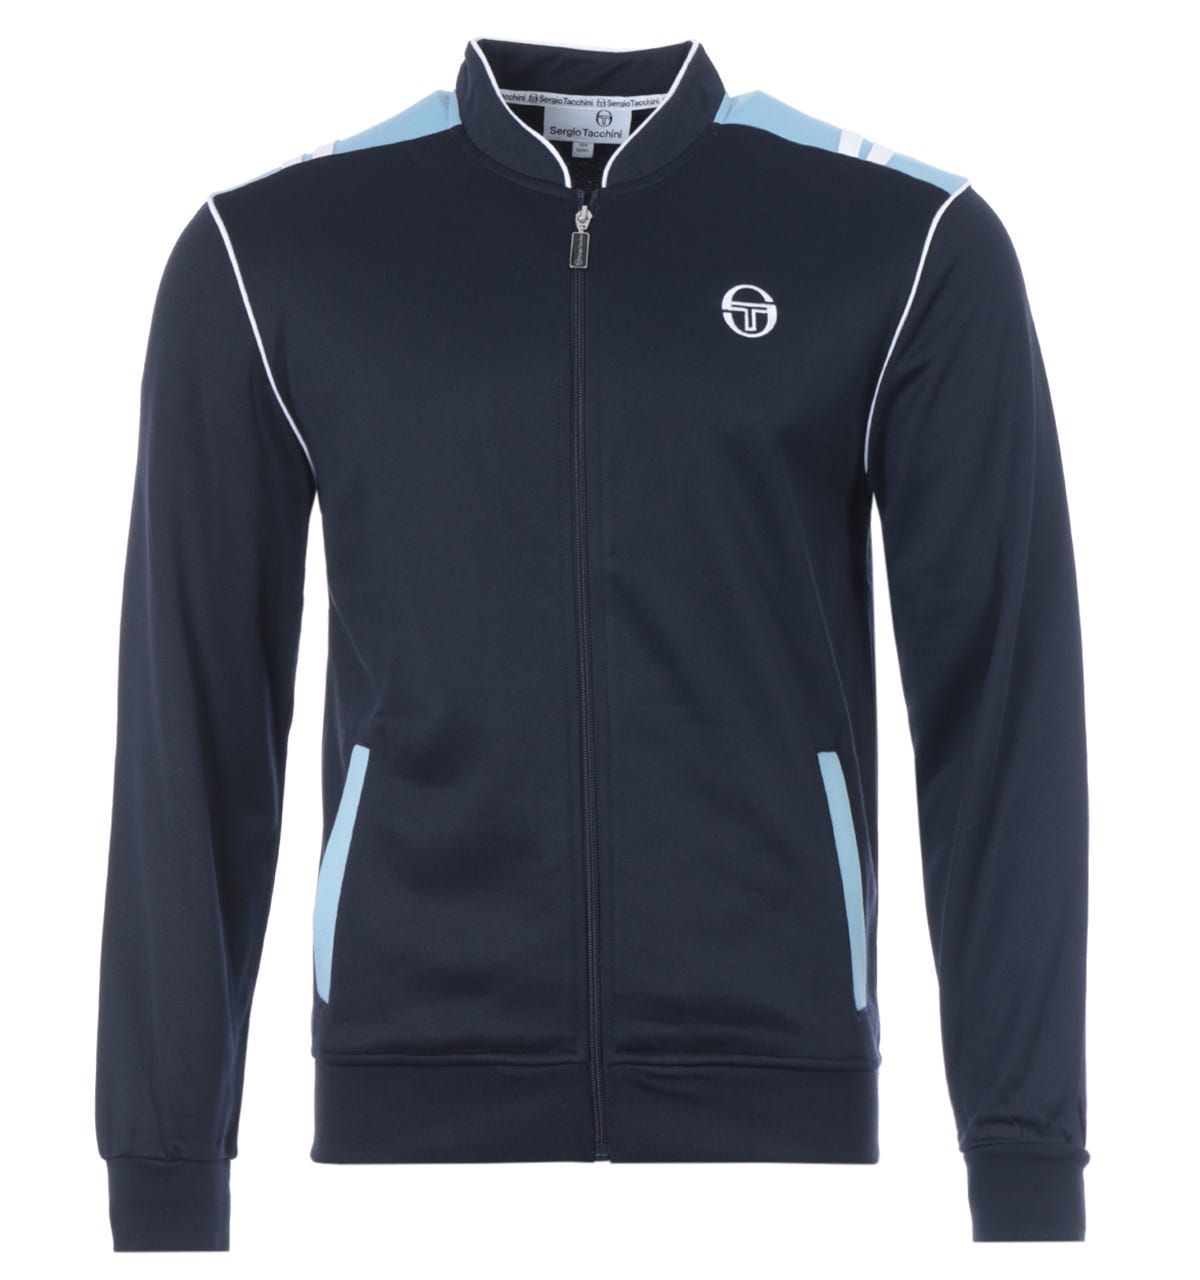 World renowned Italian sportswear brand Sergio Tacchini has been representing authenticity, craftsmanship and style since 1966, through their heritage and classic designs. The Sammy Track Top is crafted from a comfy cotton blend, featuring a stand up collar, full zip closure, twin side welt pocket, ribbed trims and sporty contrast stripes and accents. Finished with the iconic Sergio Tacchini logo embroidered at the chest. Regular Fit, Cotton Poly Blend, Stand Up Collar, Full Zip Closure, Twin Side Welt Pockets, Contrast Accents, Sergio Tacchini Branding. Style & Fit: Regular Fit, Fits True to Size. Composition & Care: 60% Polyester, 40% Cotton, Machine Wash.